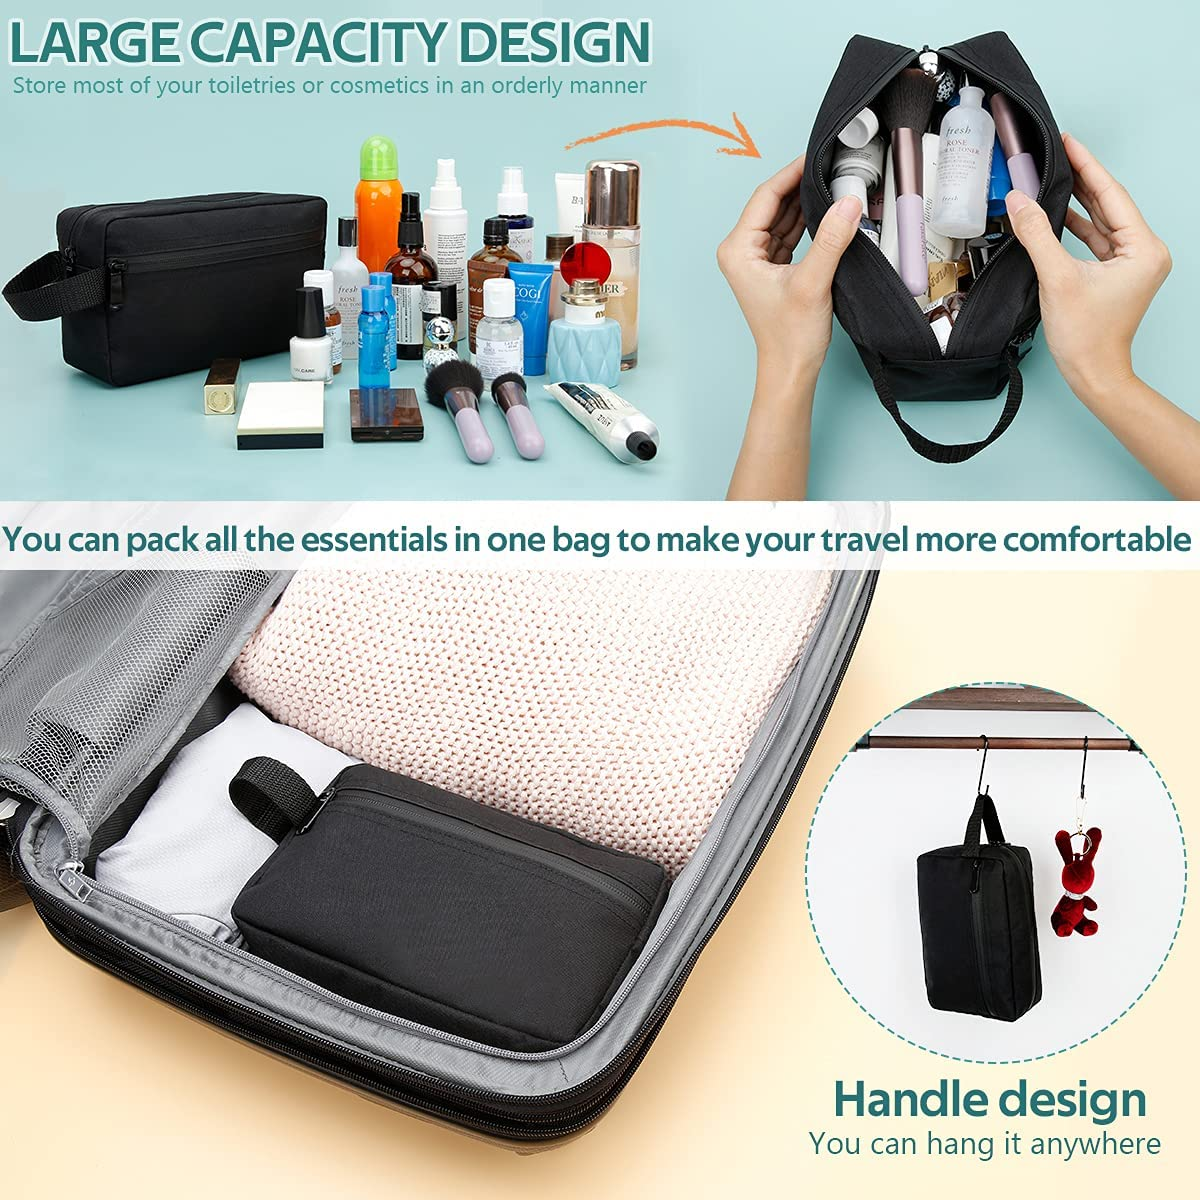 Travel Toiletry Bag for Women and Men, Water-Resistant Shaving Bag for Toiletries Accessories, Foldable Storage Bags with Divider and Handle for Cosmetics Toiletries Brushes Tools (Black)